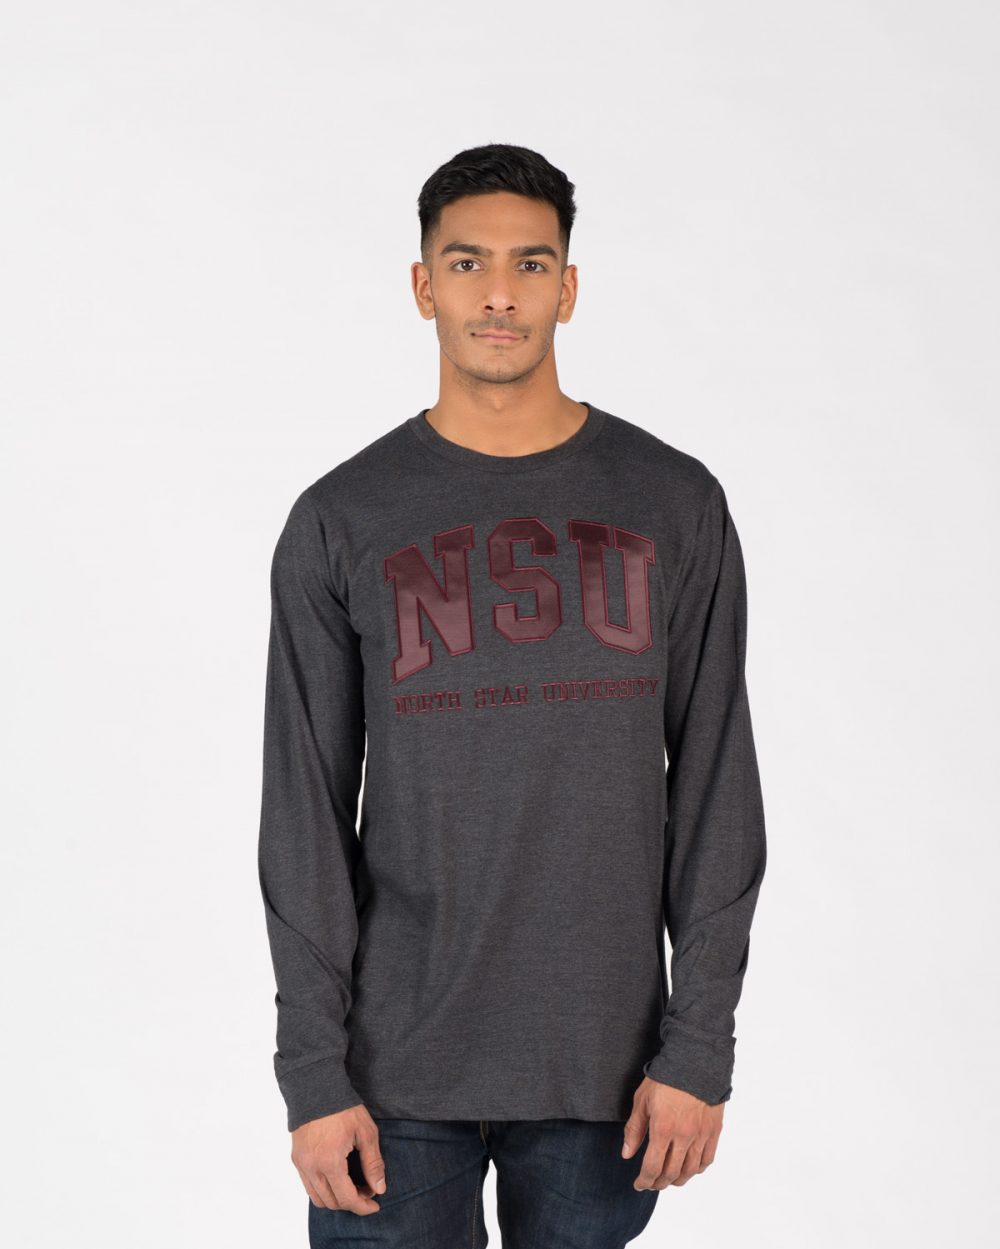 Unisex fit Signature Longsleeve 204 in charcoal with burgundy embroidery on male model.